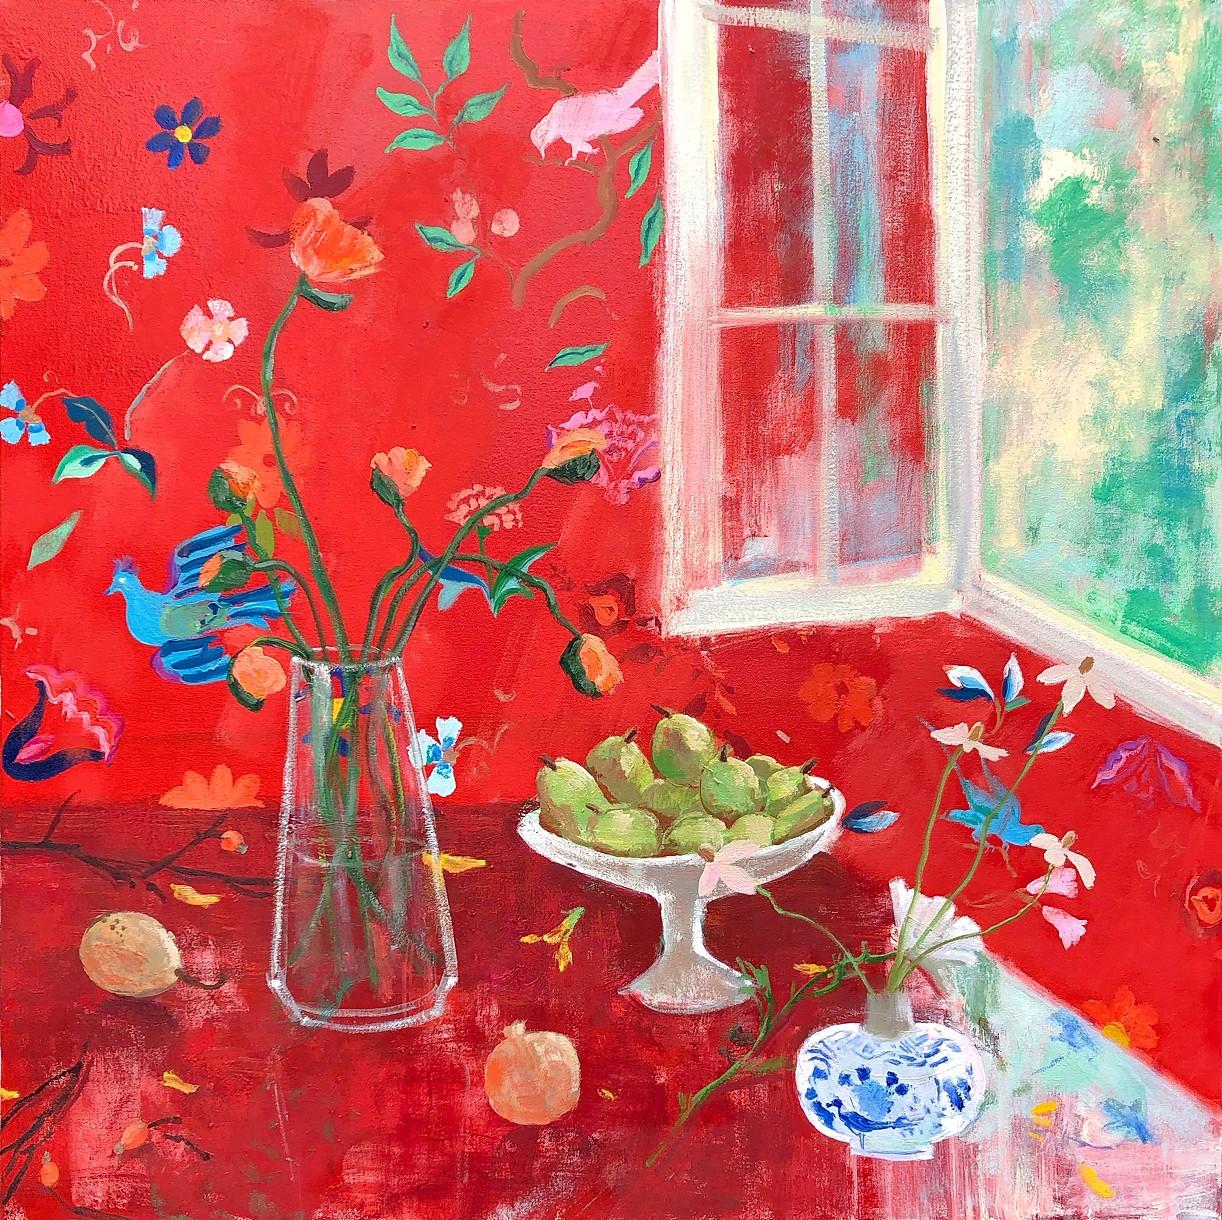 Doreen Gadsby - Vertical Floral Still Life For Sale at 1stDibs